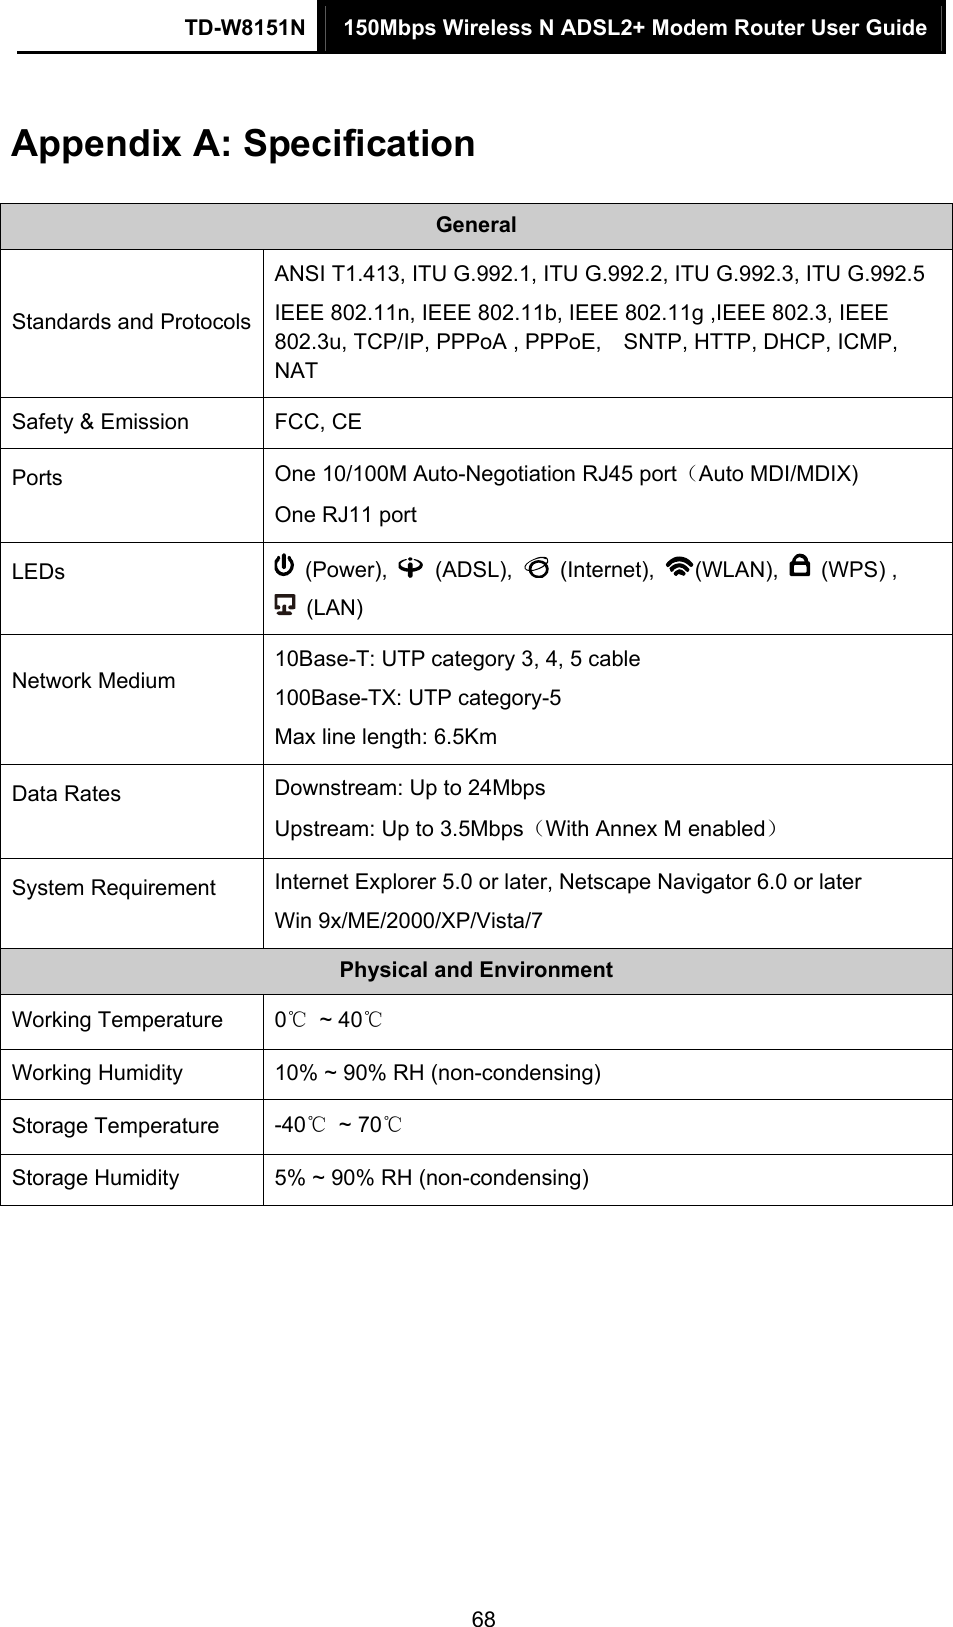 TD-W8151N  150Mbps Wireless N ADSL2+ Modem Router User Guide  68Appendix A: Specification General Standards and Protocols ANSI T1.413, ITU G.992.1, ITU G.992.2, ITU G.992.3, ITU G.992.5 IEEE 802.11n, IEEE 802.11b, IEEE 802.11g ,IEEE 802.3, IEEE 802.3u, TCP/IP, PPPoA , PPPoE,    SNTP, HTTP, DHCP, ICMP, NAT Safety &amp; Emission  FCC, CE Ports  One 10/100M Auto-Negotiation RJ45 port（Auto MDI/MDIX) One RJ11 port LEDs   (Power),   (ADSL),   (Internet),  (WLAN),   (WPS) ,  (LAN) Network Medium  10Base-T: UTP category 3, 4, 5 cable 100Base-TX: UTP category-5 Max line length: 6.5Km Data Rates  Downstream: Up to 24Mbps Upstream: Up to 3.5Mbps（With Annex M enabled） System Requirement  Internet Explorer 5.0 or later, Netscape Navigator 6.0 or later Win 9x/ME/2000/XP/Vista/7 Physical and Environment Working Temperature  0℃ ~ 40℃ Working Humidity  10% ~ 90% RH (non-condensing) Storage Temperature  -40℃ ~ 70℃ Storage Humidity  5% ~ 90% RH (non-condensing)  